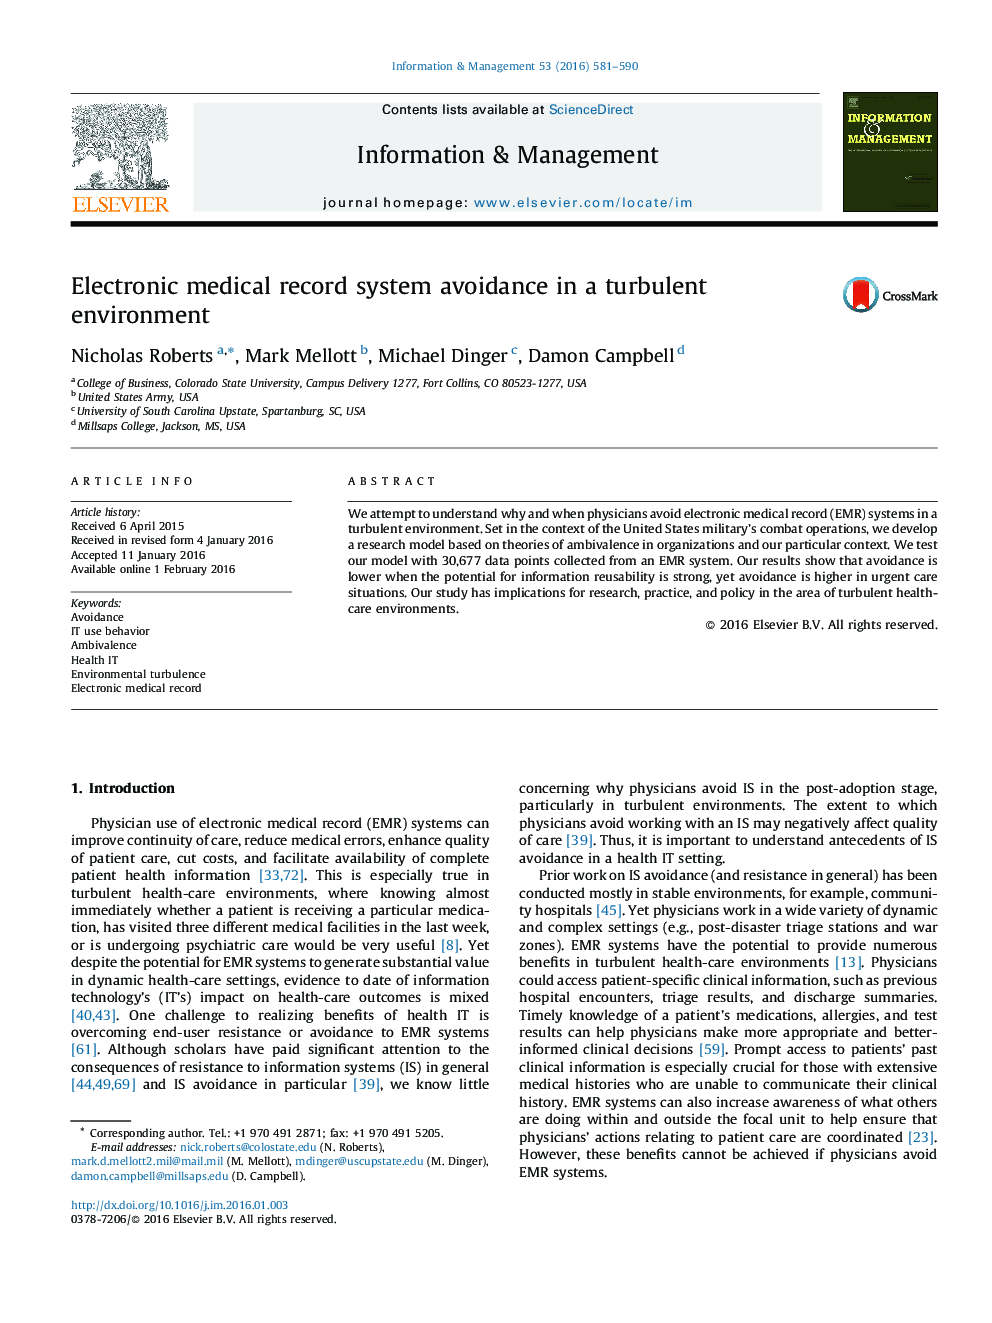 Electronic medical record system avoidance in a turbulent environment